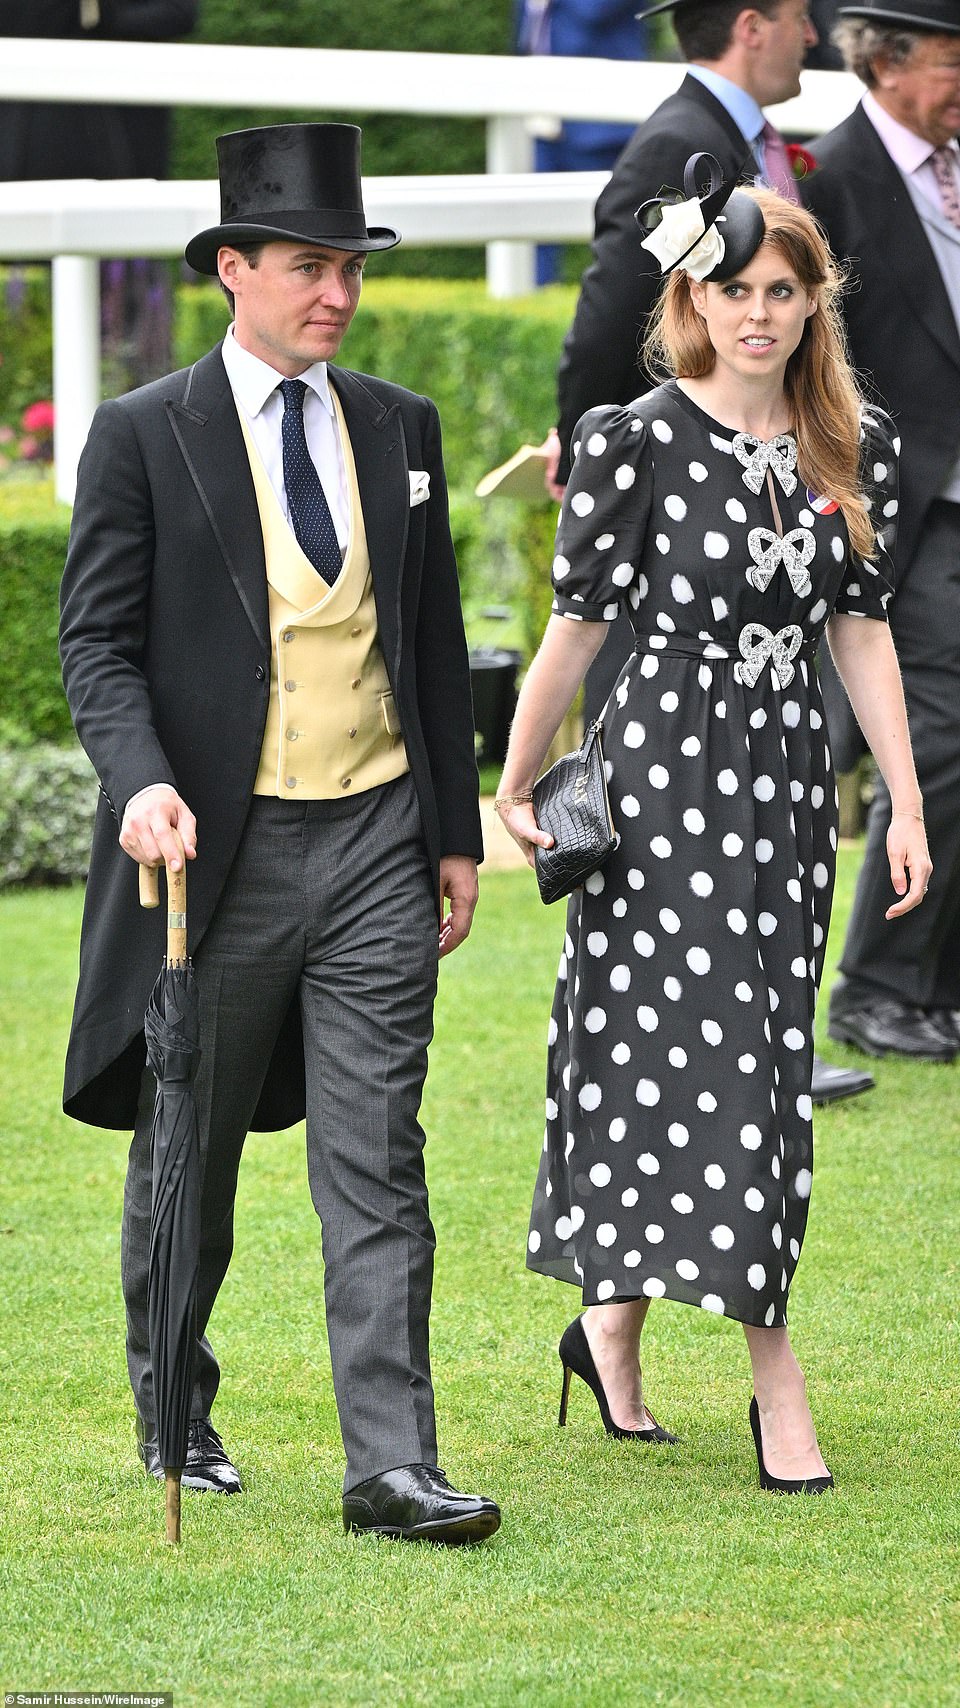 The couple dressed elegantly for their day, with the royal donning a navy blue and white polka dot dress while her husband opted for a traditional suit